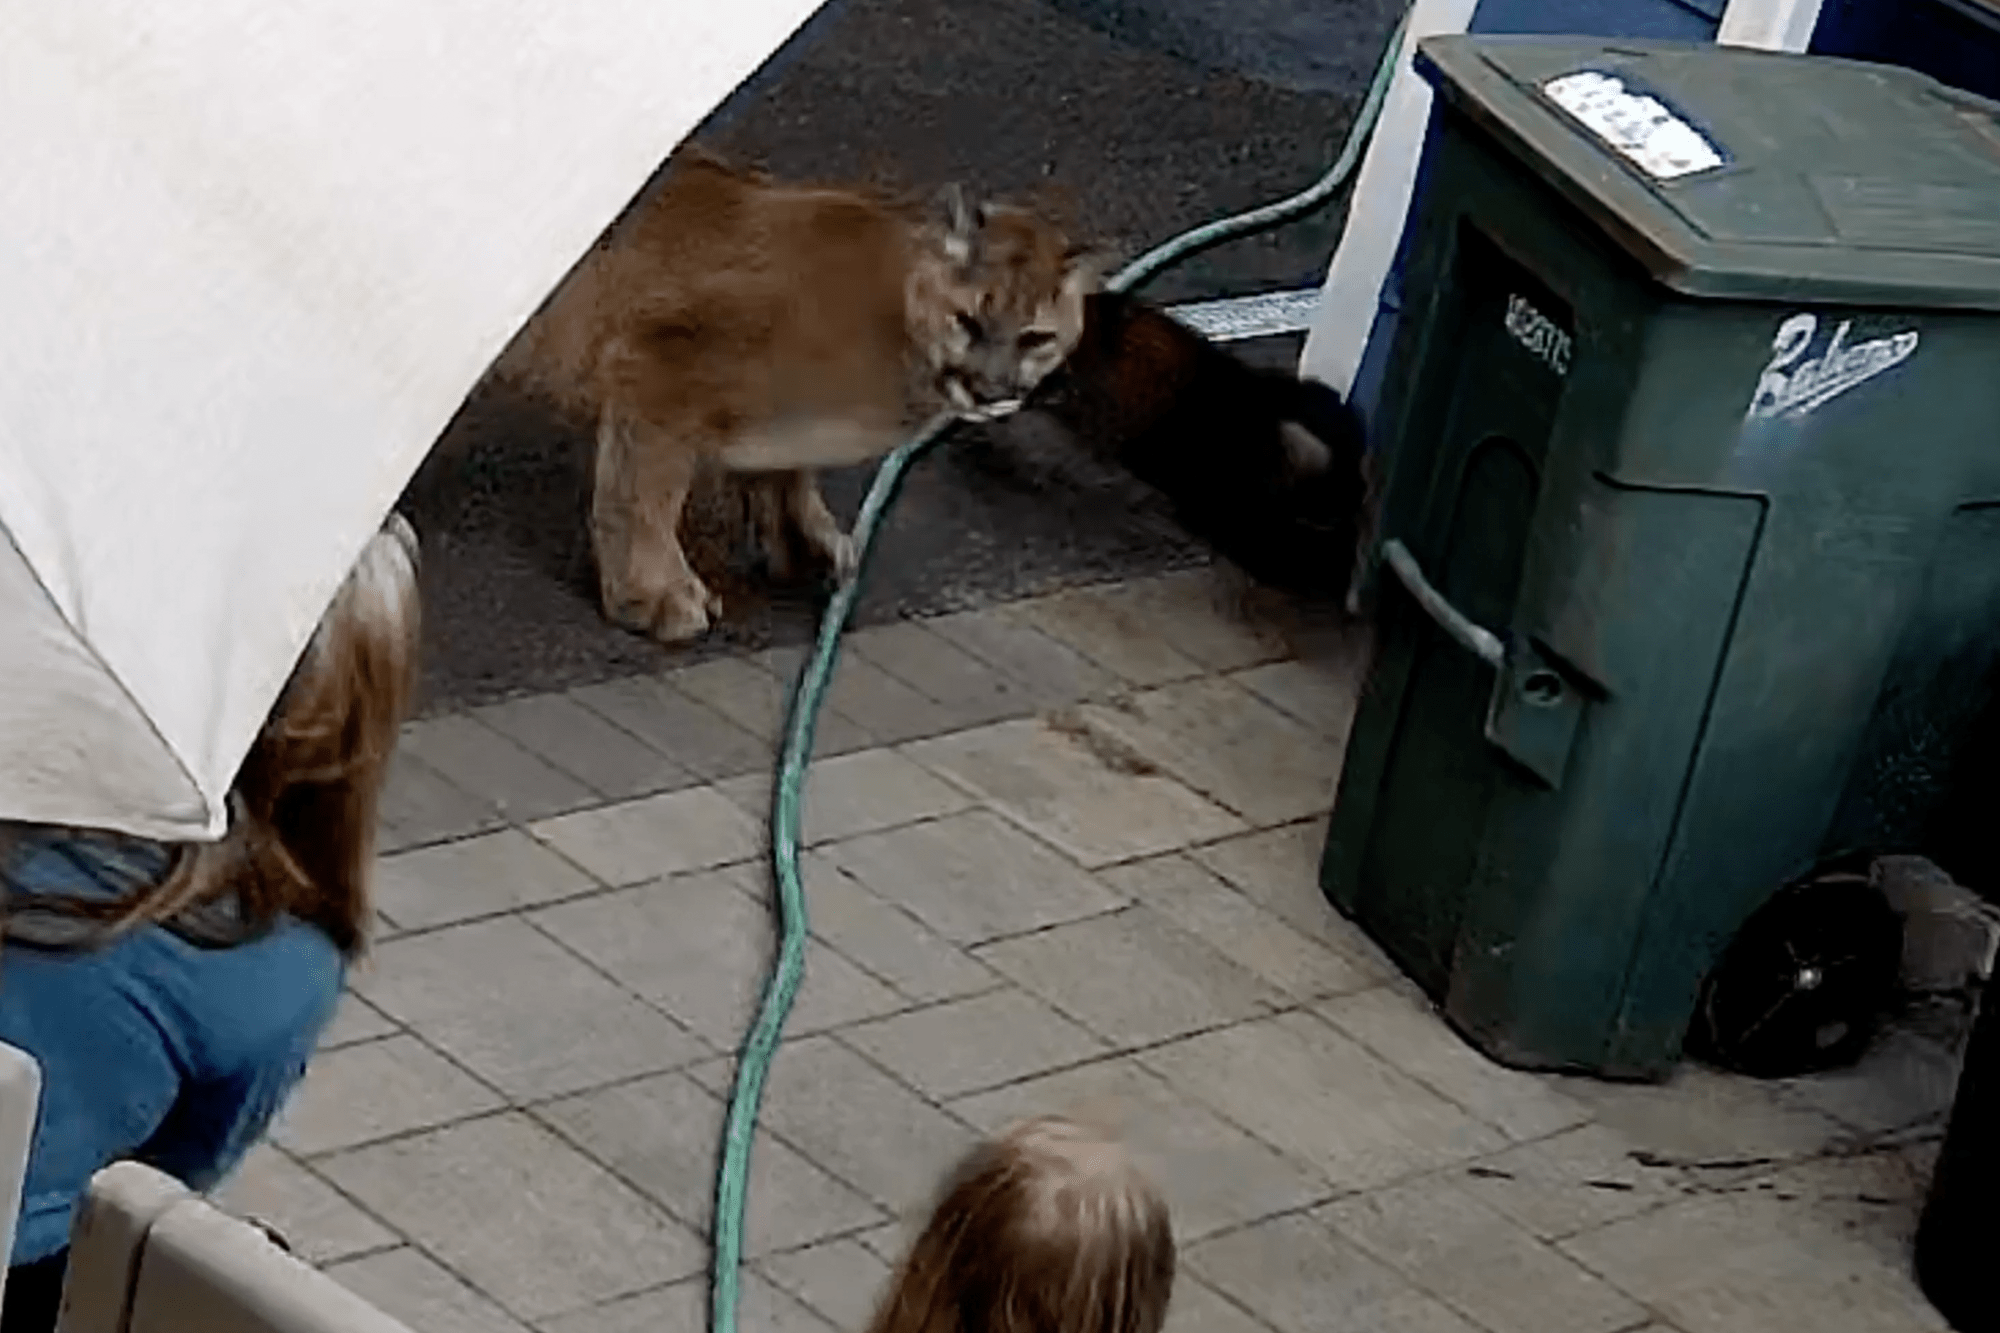 Cougar startles WA state family as it chases pets through backyard (Video)